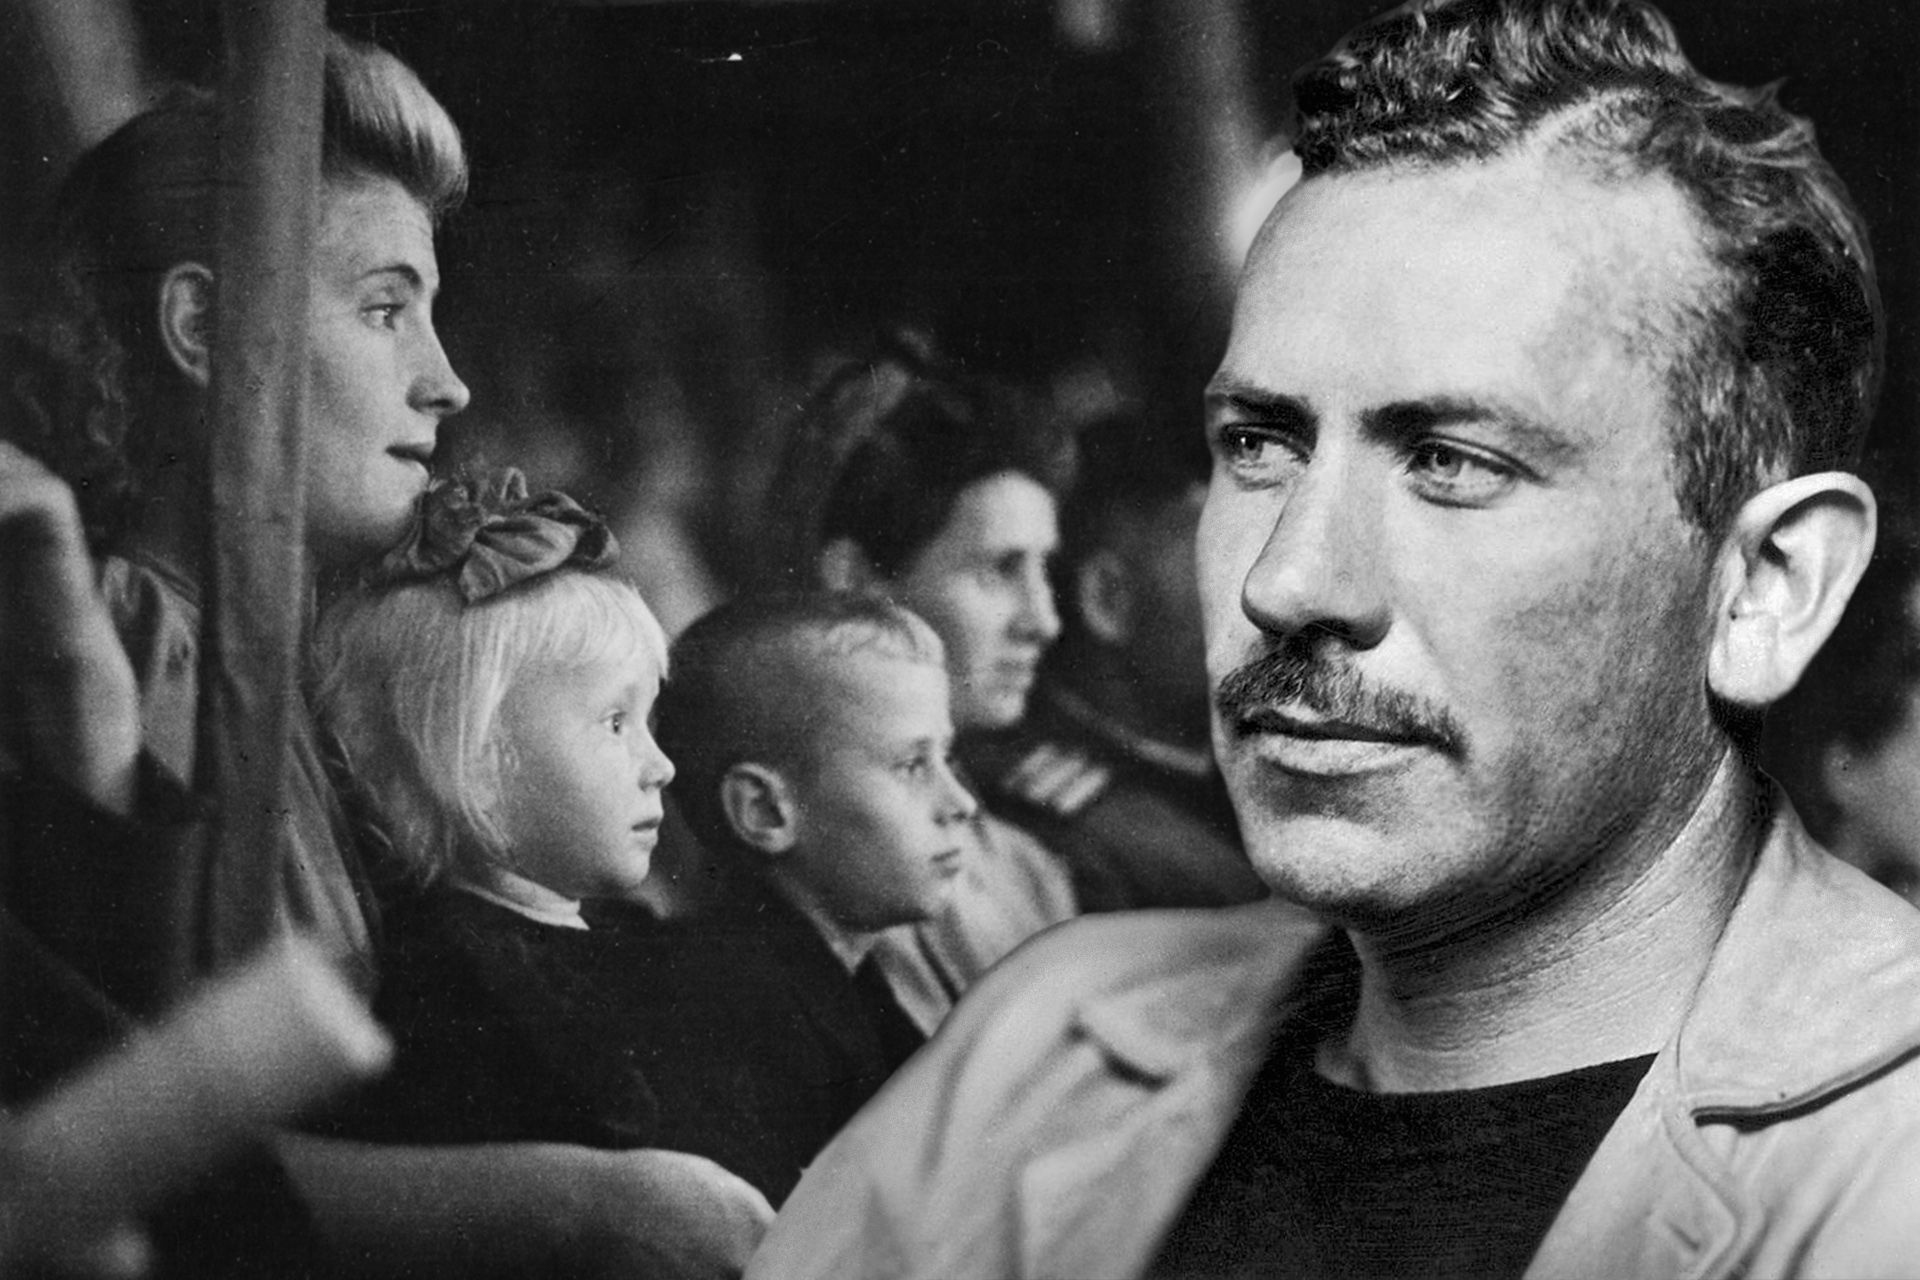 KYIV WOMEN — NOT MUSCOVITES: how John Steinbeck got to know the real Ukraine